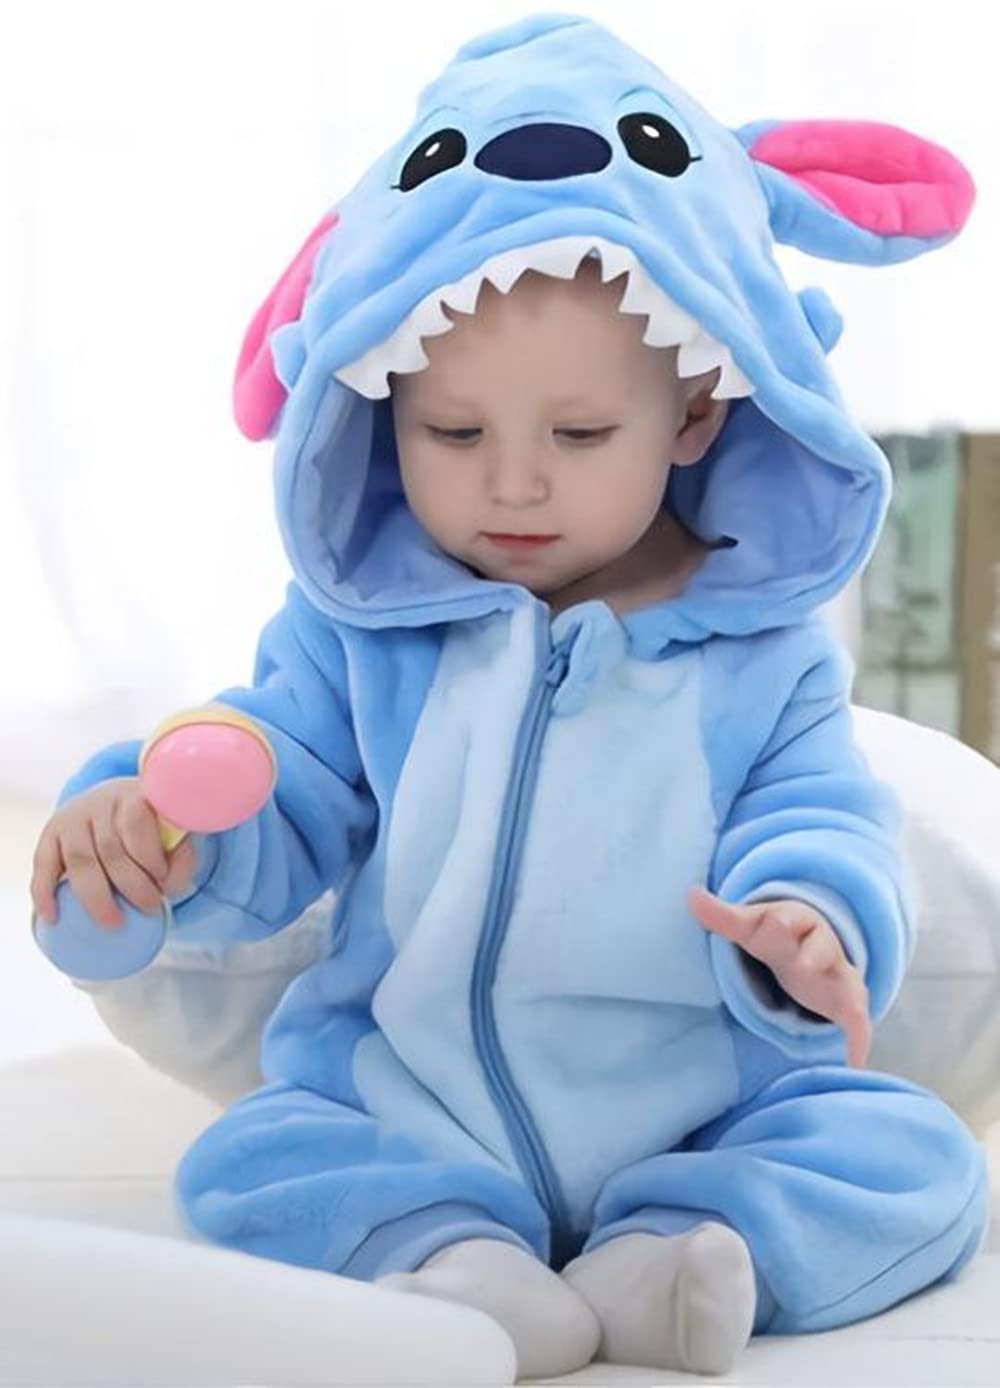 MUST ROSE SPORTS AND HOMEWEAR Unisex Baby Flannel Romper Animal Onesie Costume Hooded Cartoon Outfit Suit